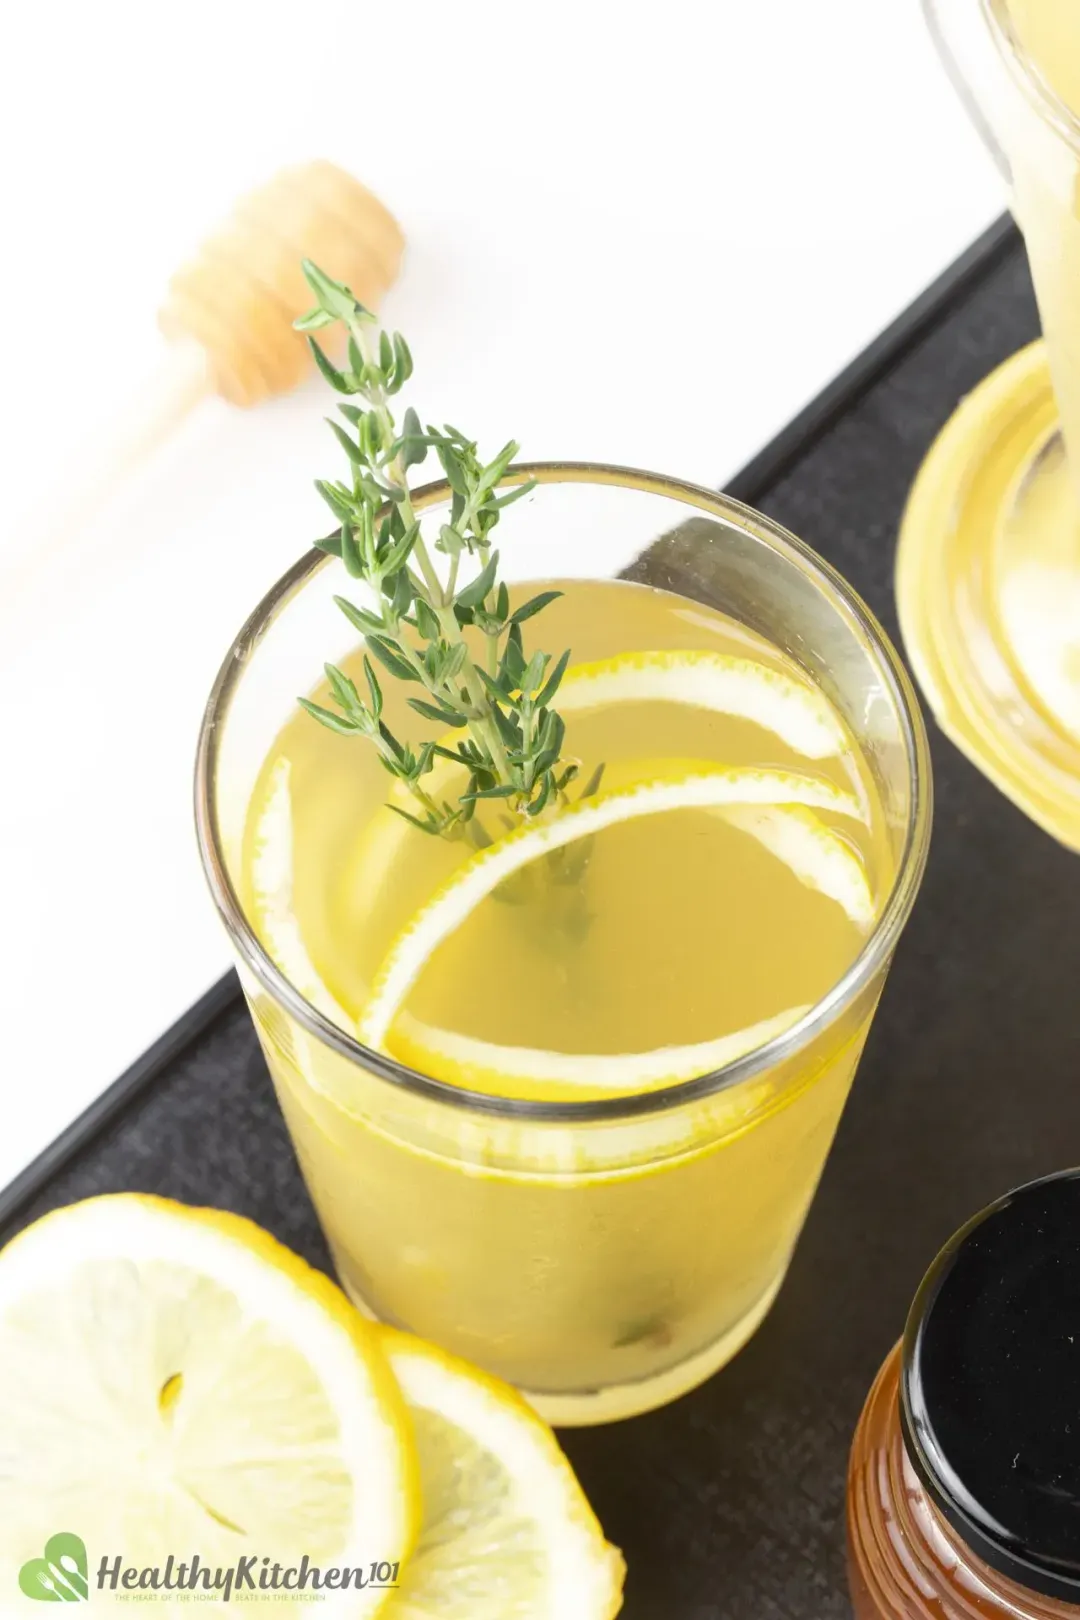 A shot from the top of a lemonade glass filled with lemon peels and thyme sprig